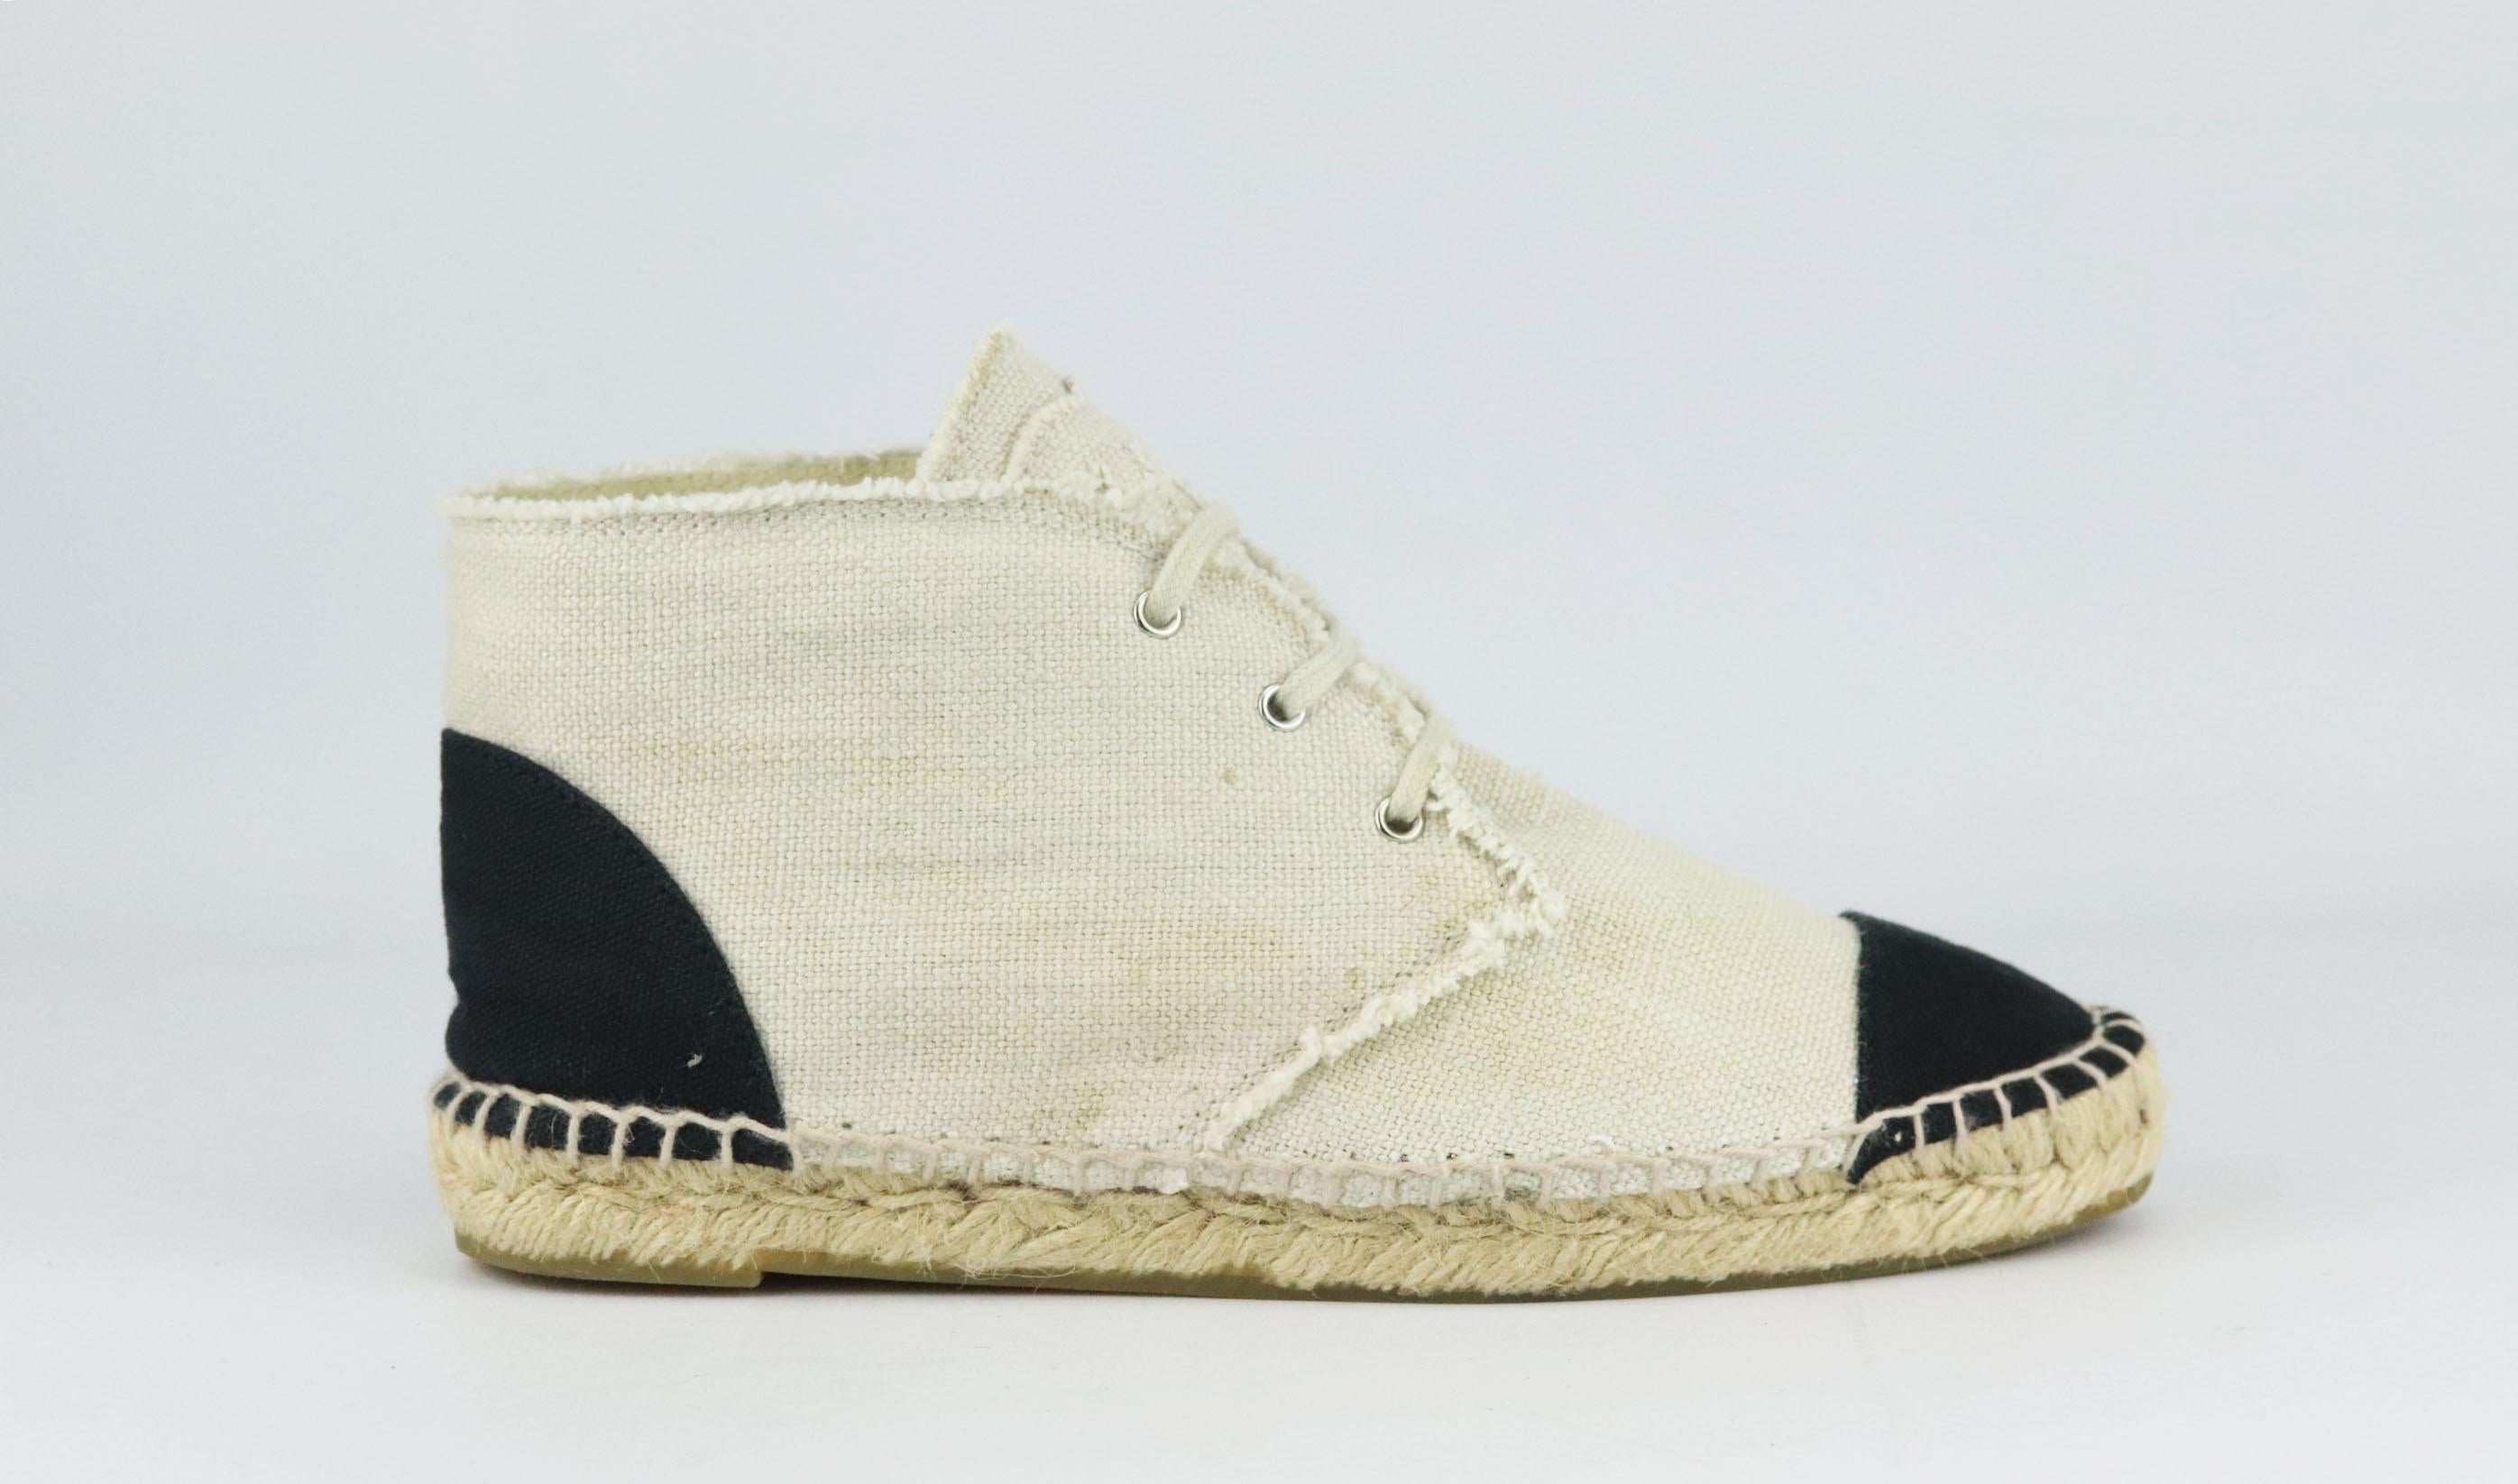 Chanel's lace-up espadrilles in cream linen, featuring the brand's trademark interlocking CC logo on the tongue in a matching frayed cream linen, they have a thick jute sole and a reinforced canvas toe which offers a comfortable and supportive